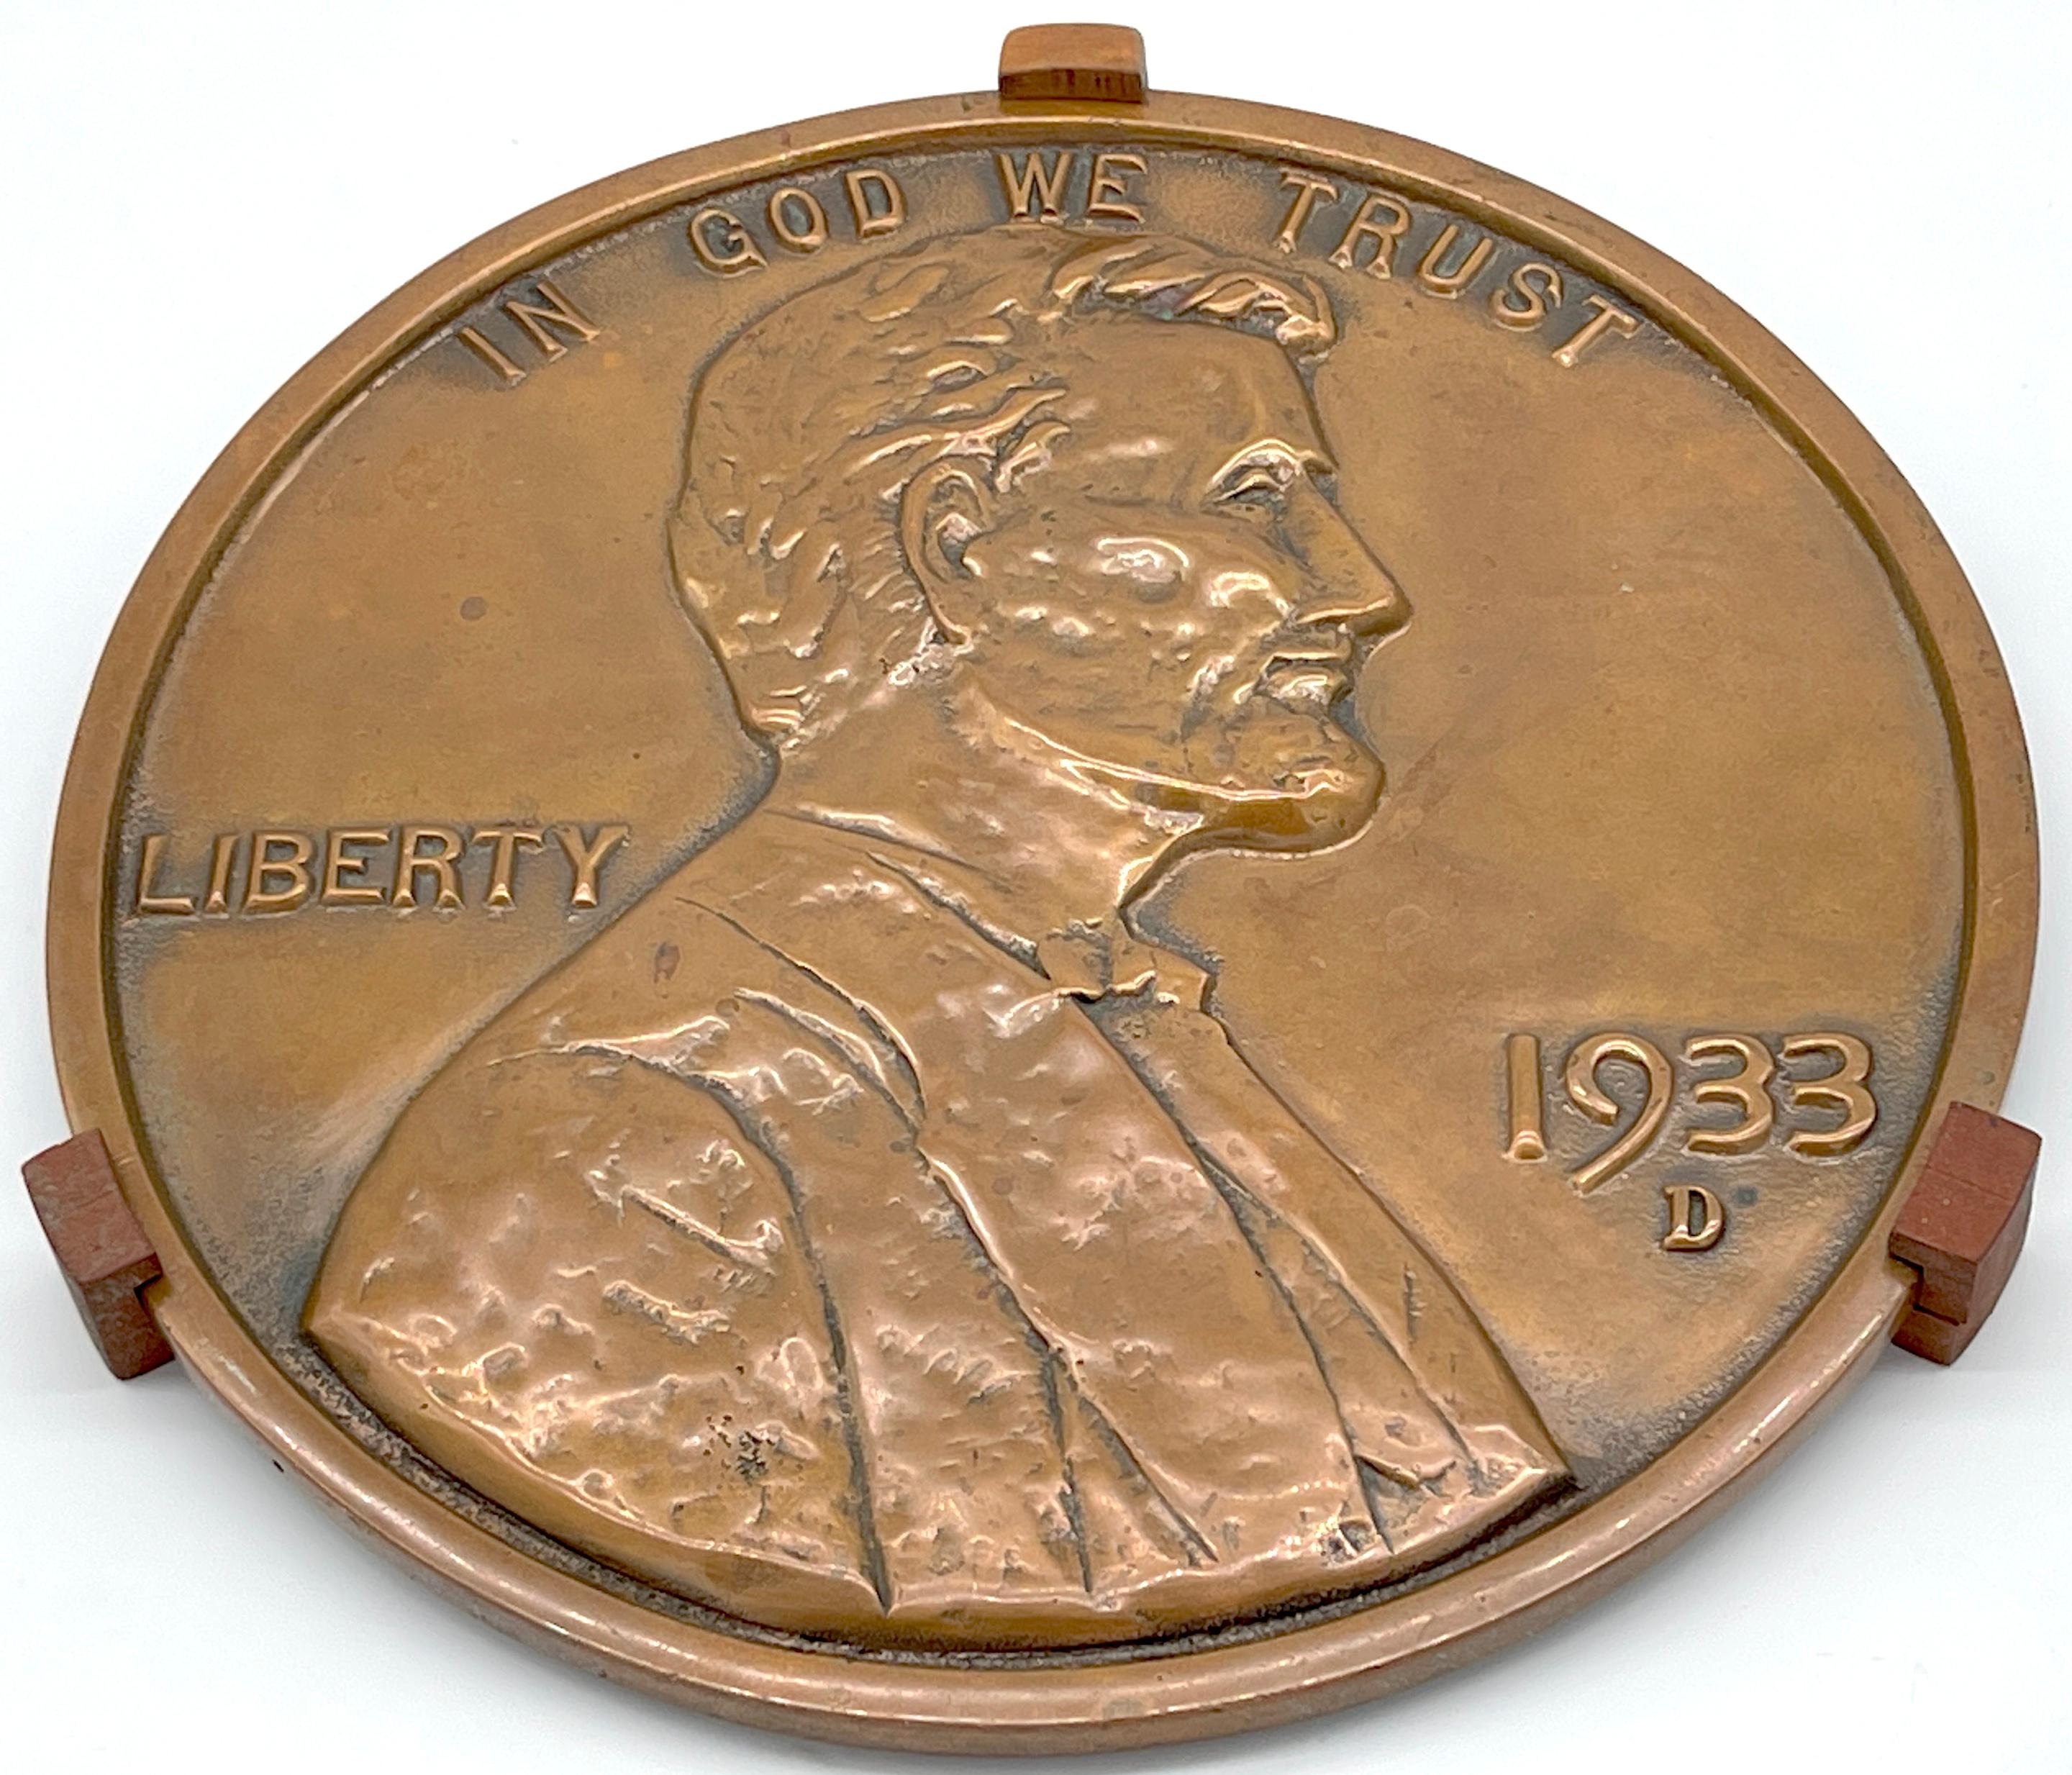 Maquette/Sculpture of Victor David Brenner's 1933 D Lincoln Penny Front/ Obverse For Sale 4